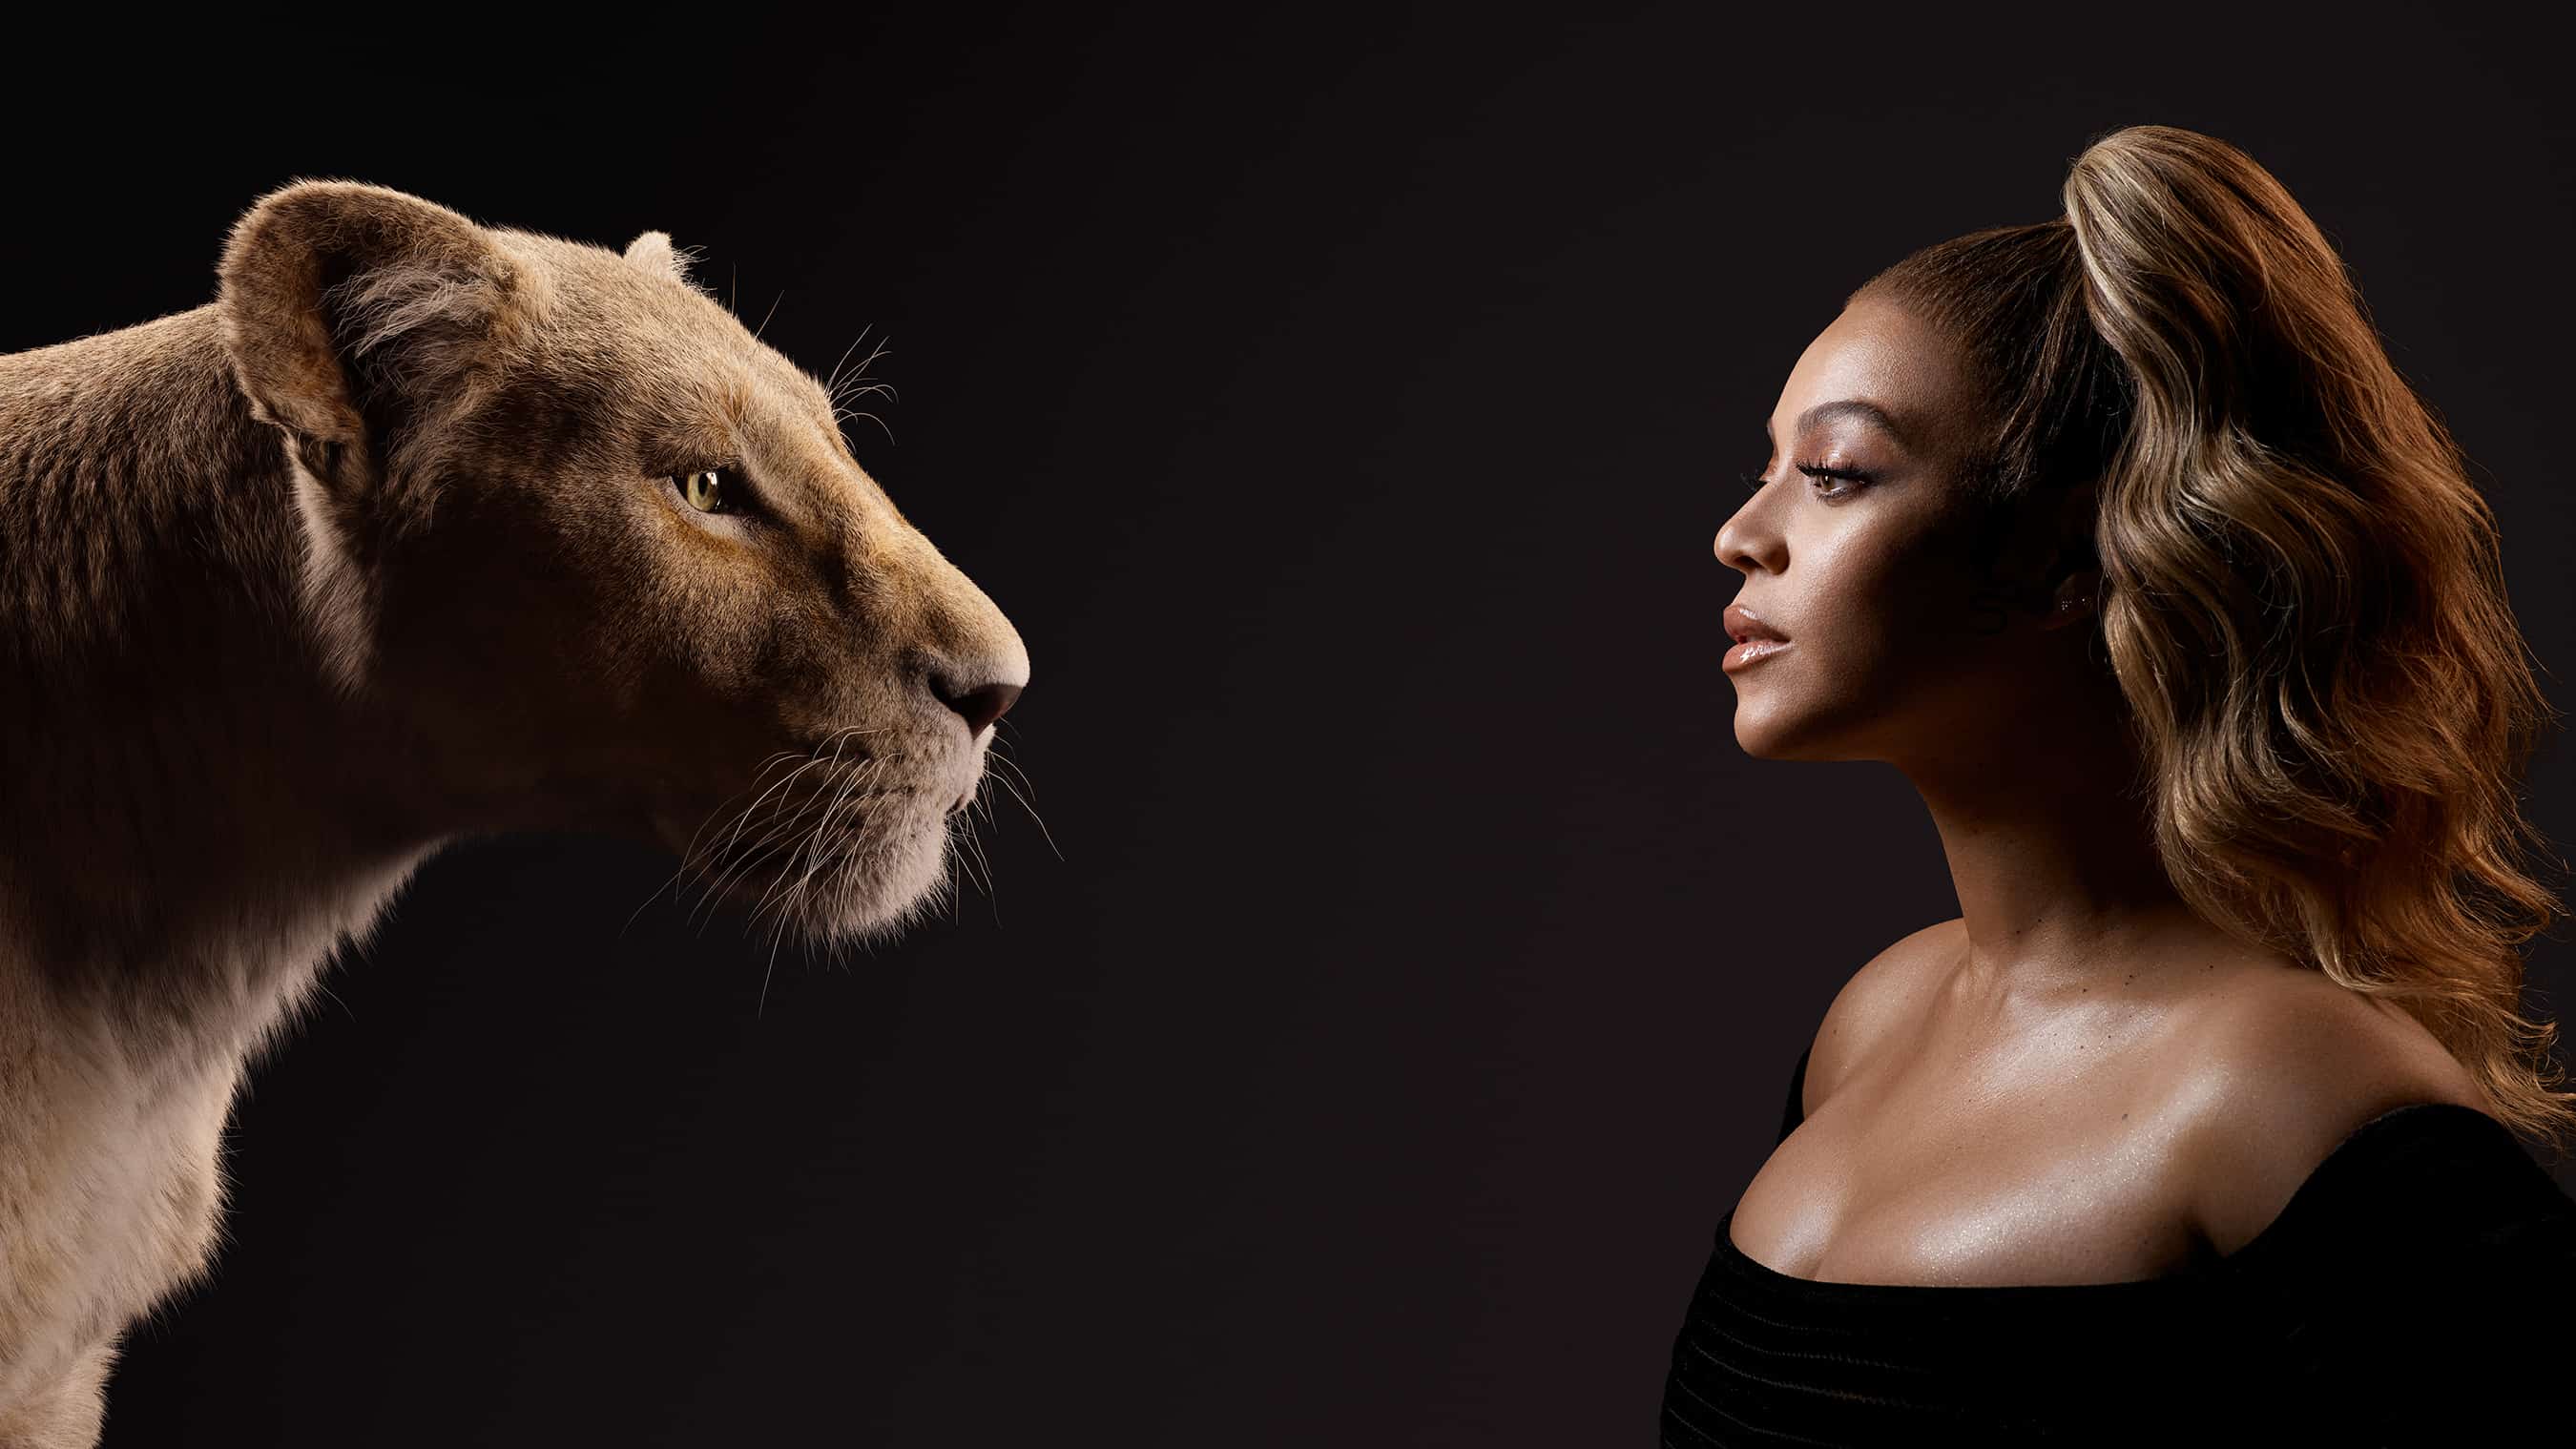 Disney Releases New Image Of Beyoncé, Donald Glover And Other Stars Of 'The Lion King' [VIDEO PHOTOS] • EBONY